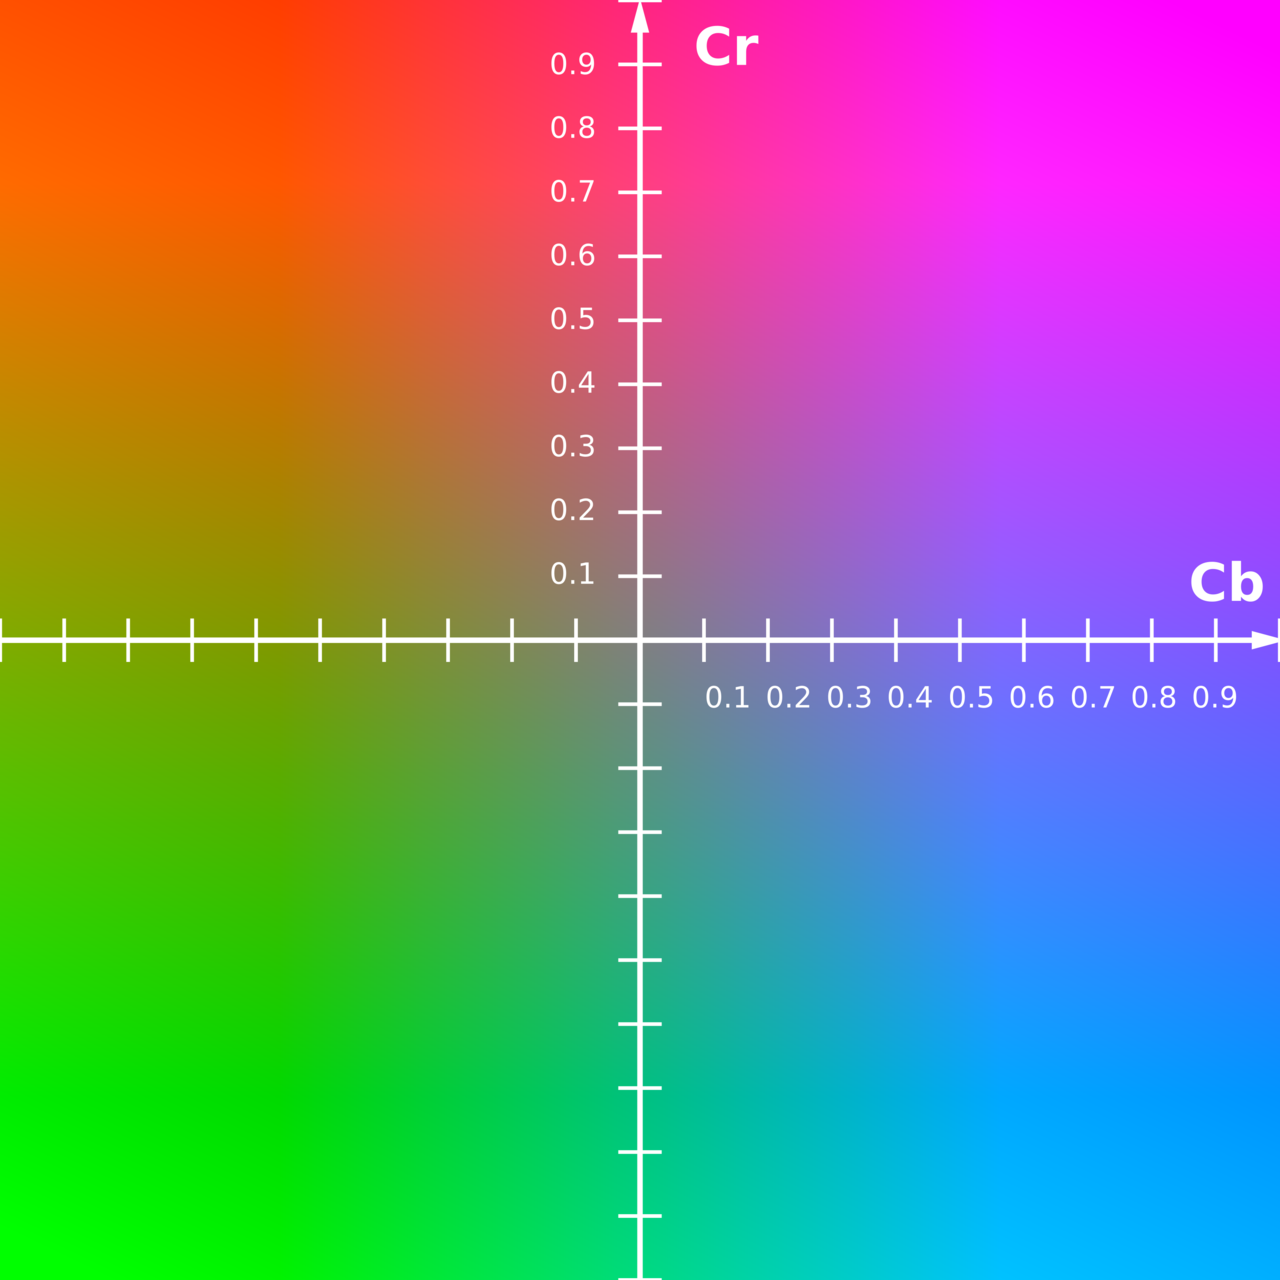 CbCr plane of the YCbCr color space, with a Y value of 0.5, Cb on the horizontal x axis going from -1 to 1, Cr on the y axis going from -1 to 1 as well